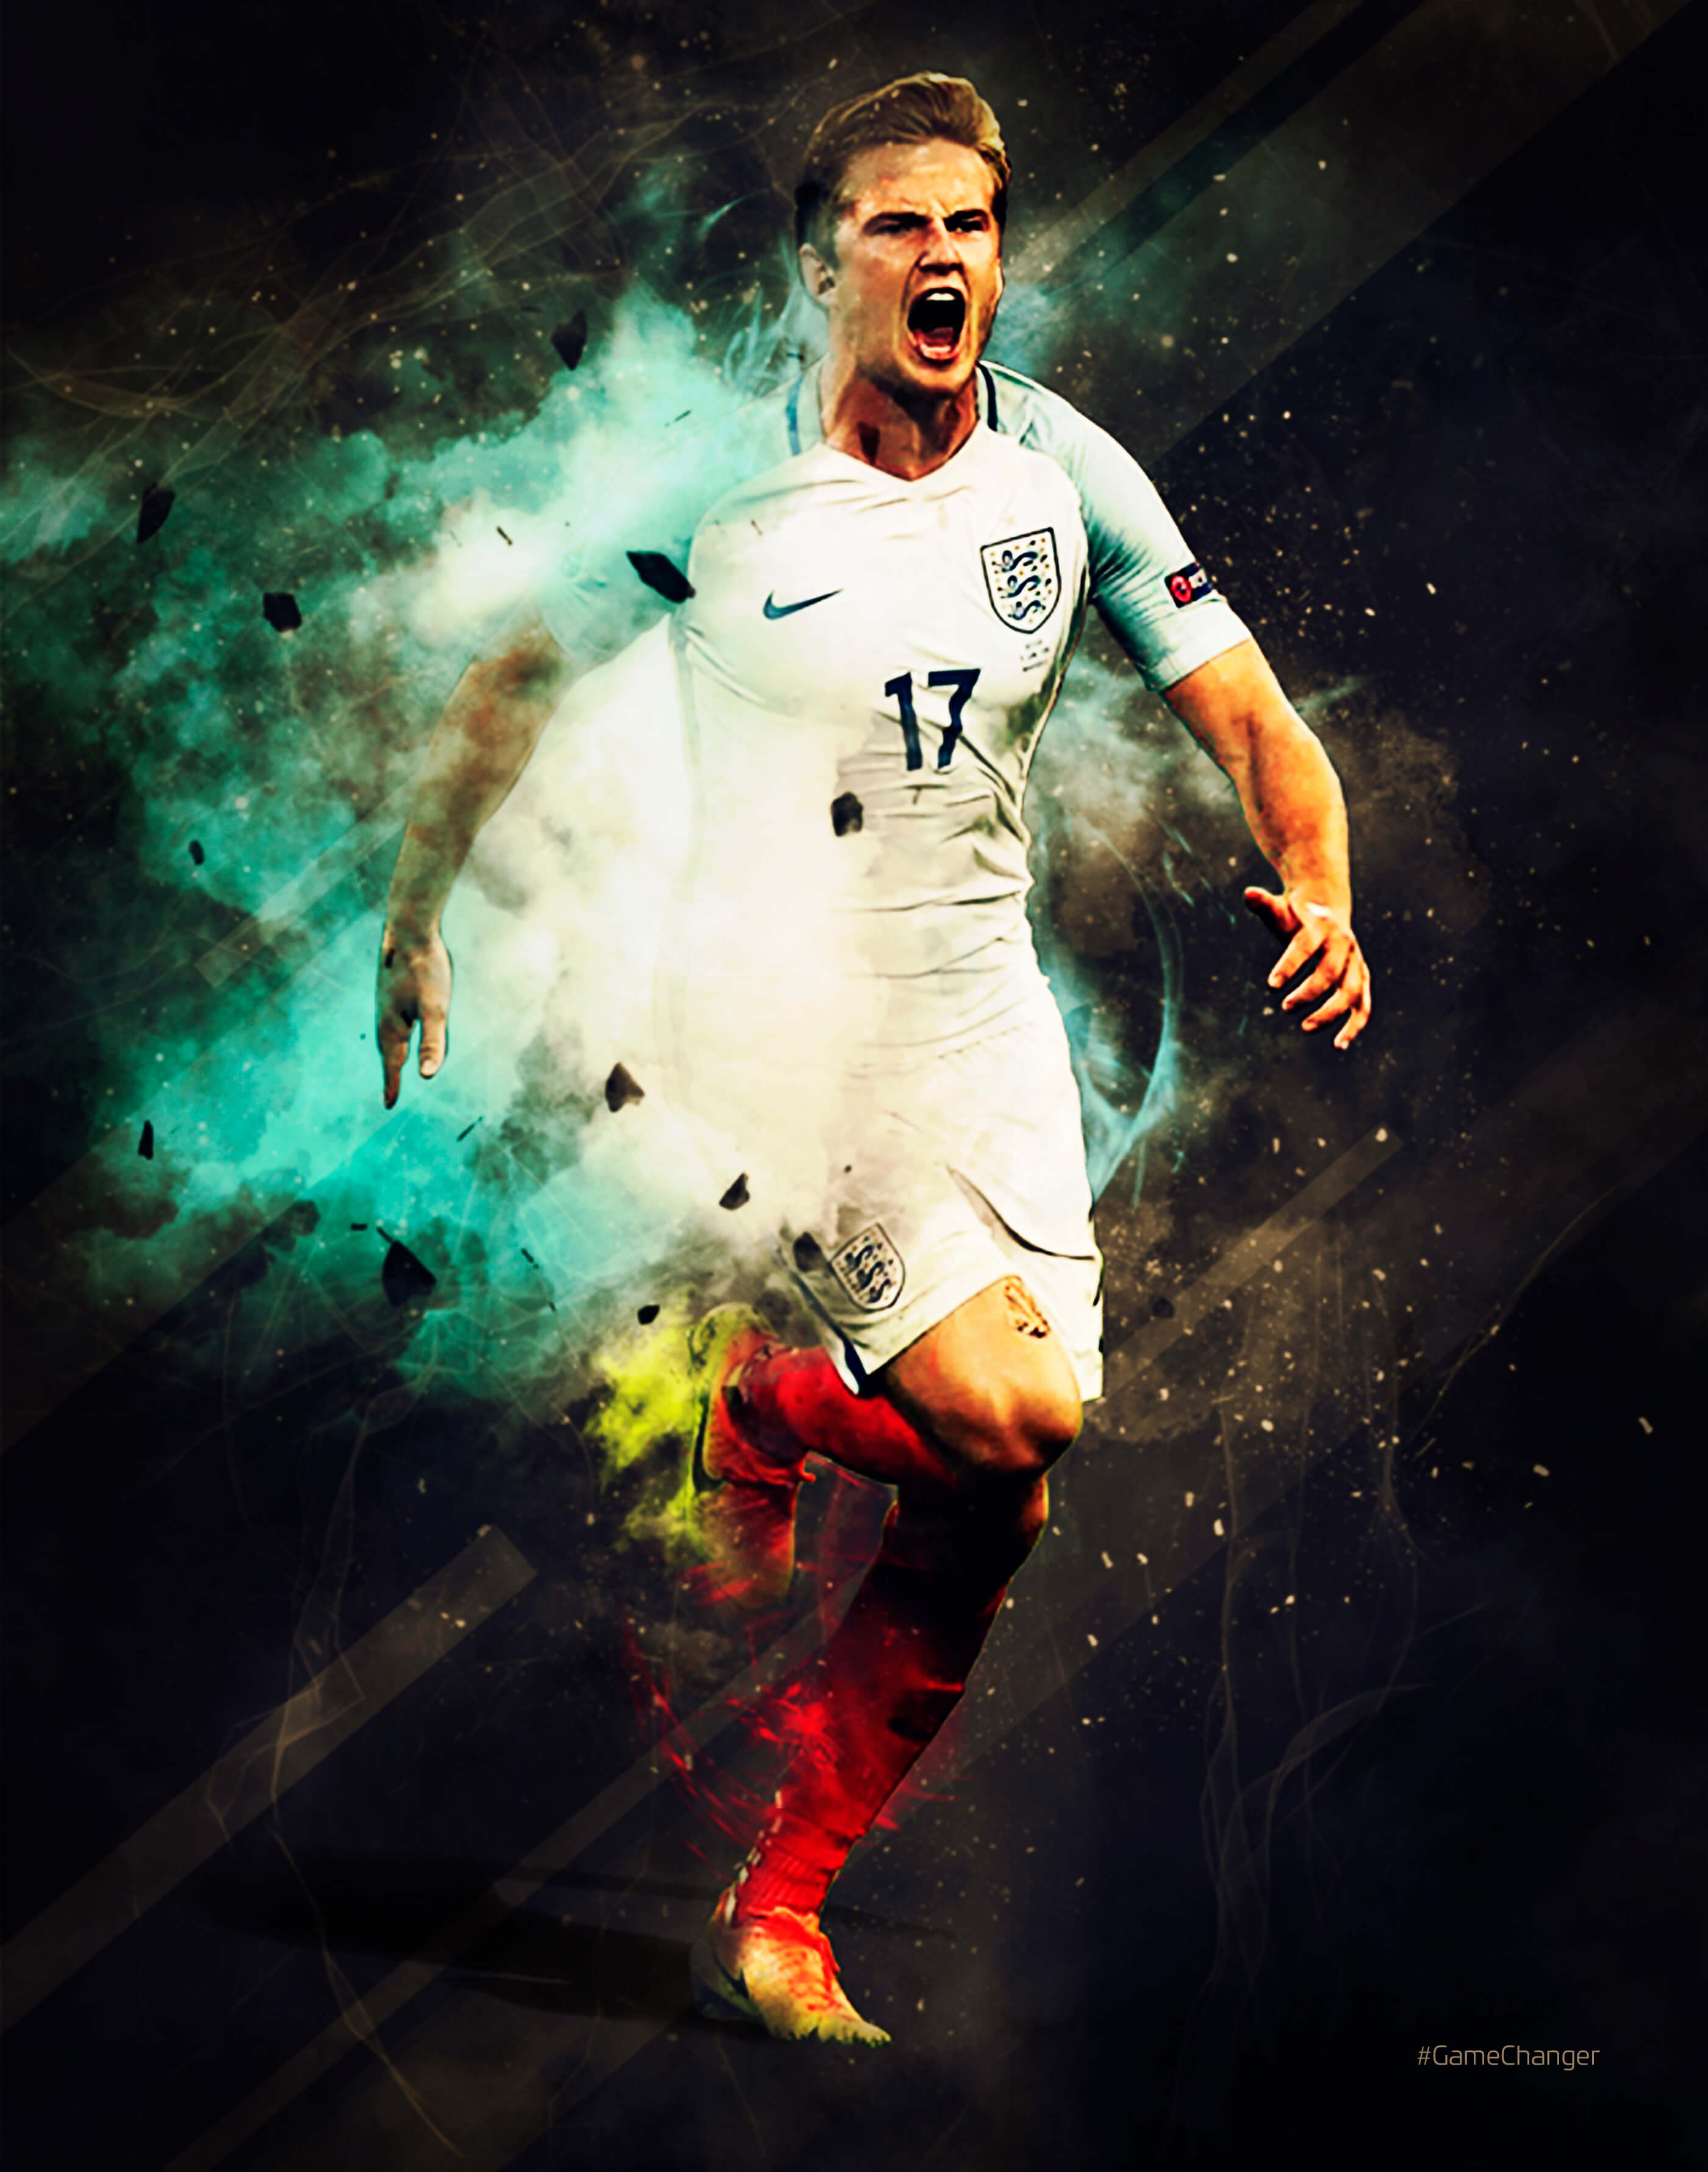 Eric Dier celebrating in a white England kit during the World Cup with red socks and yellow Nike boots